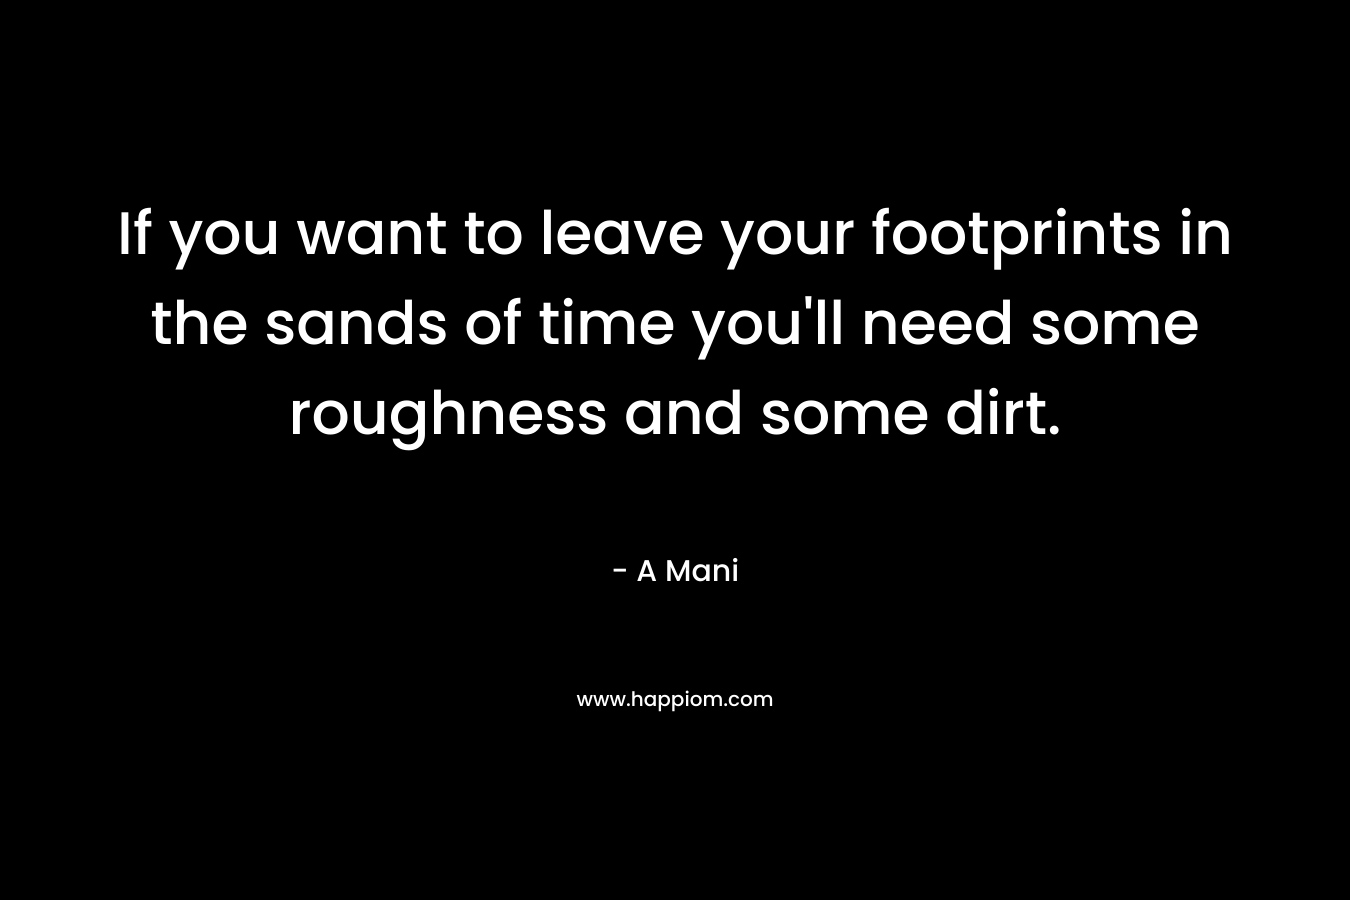 If you want to leave your footprints in the sands of time you’ll need some roughness and some dirt. – A  Mani